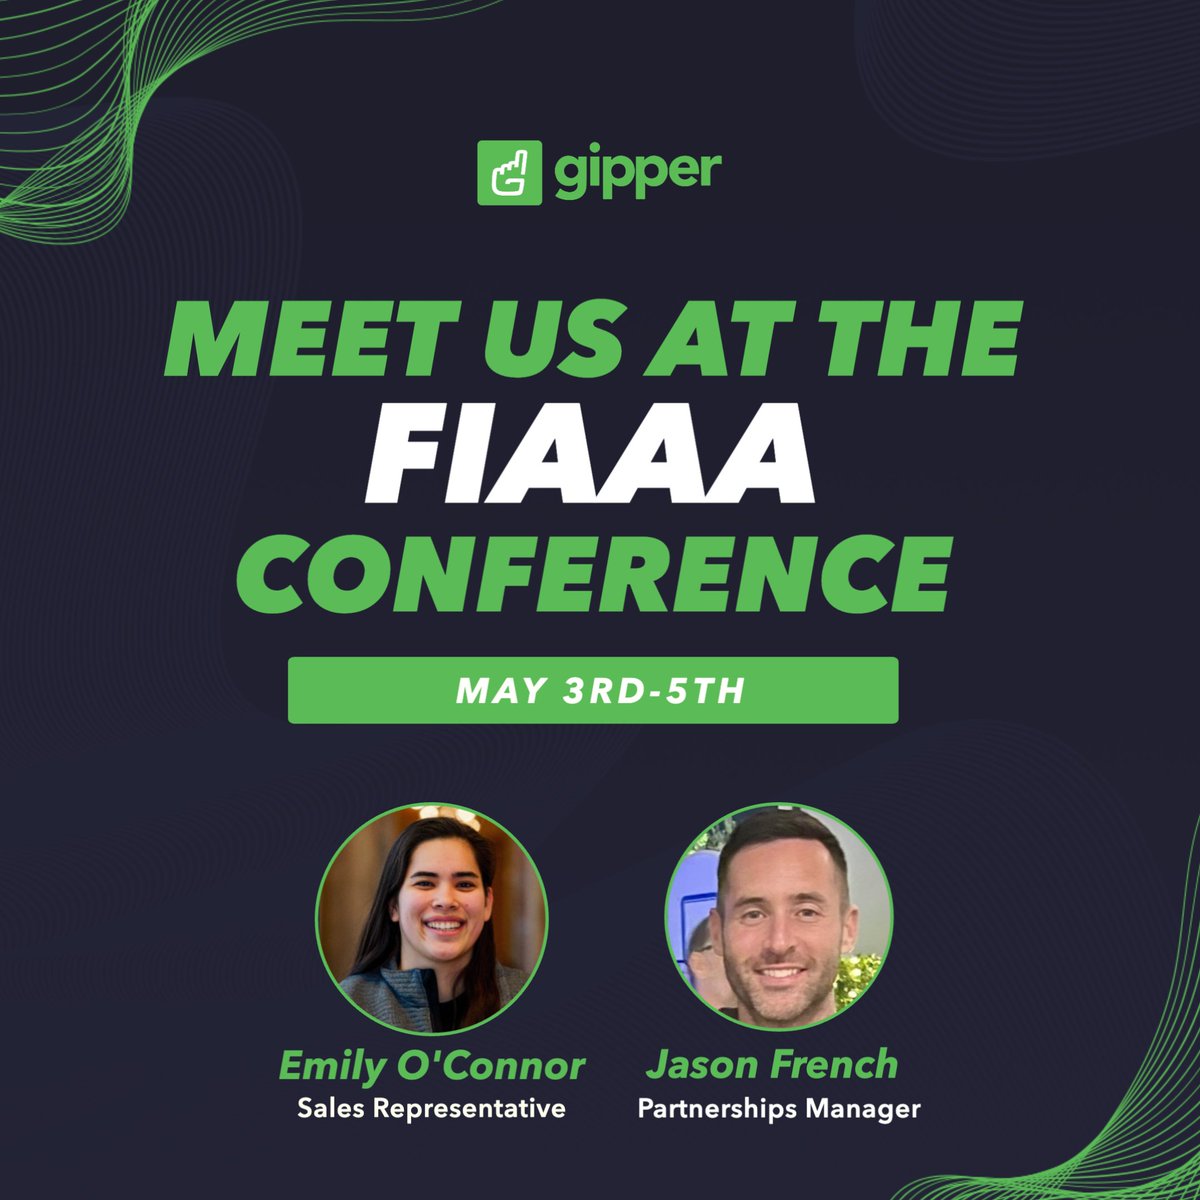 We’re in Kissimmee, FL at the @FIAAANews Conference today through Sunday! If you’re in attendance stop by, say hi, and see why YOU should #GoGipper 🚀